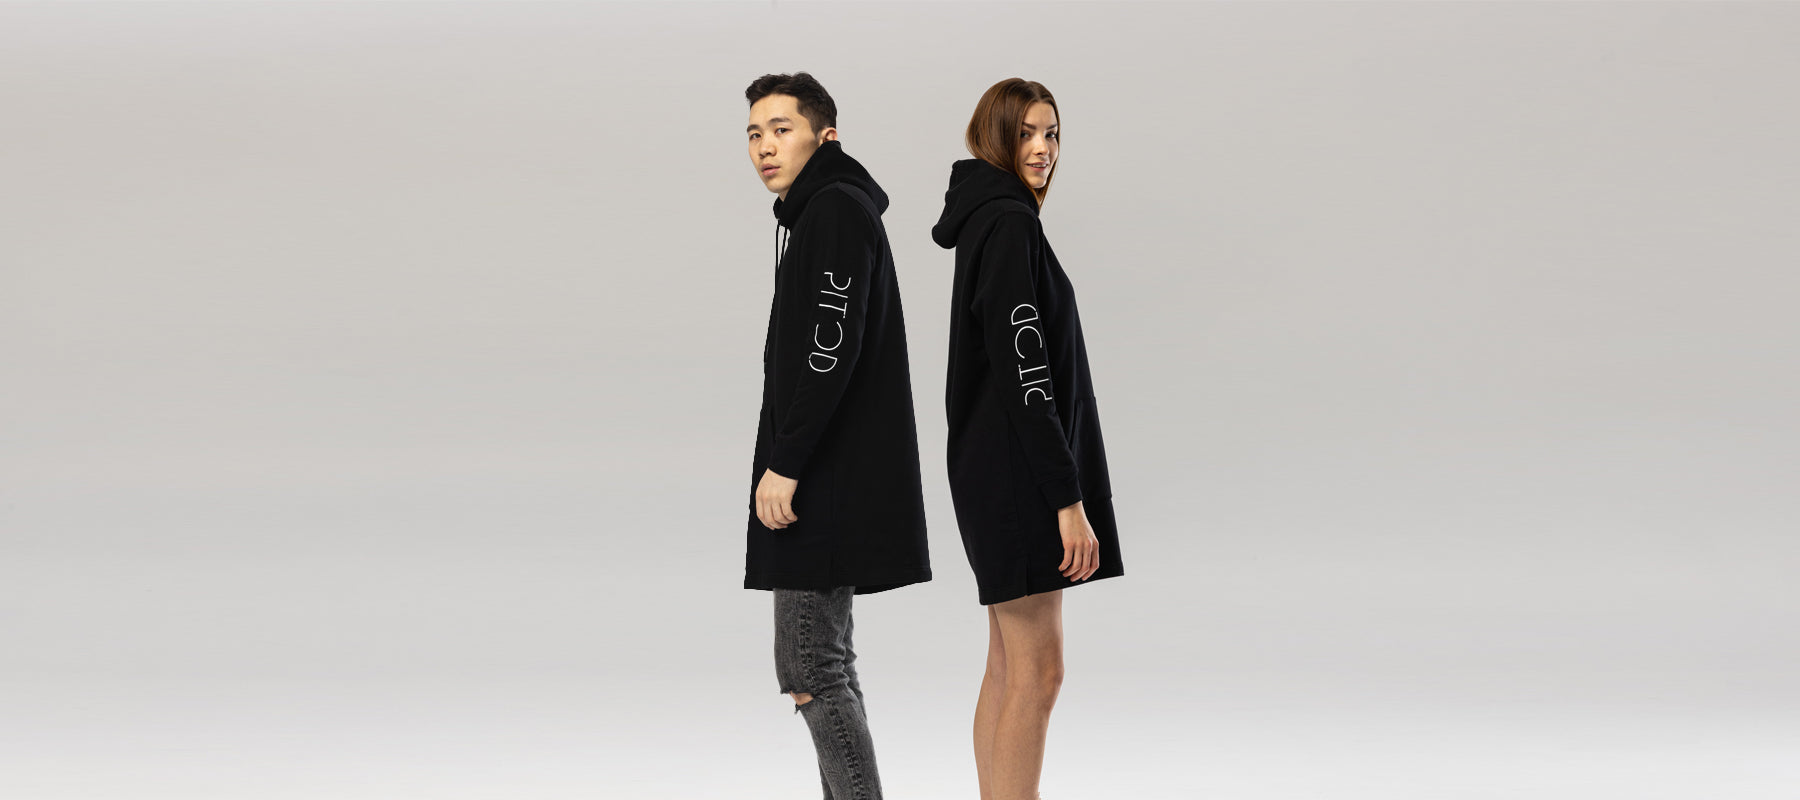 Pitod Black Hoodie Dress - Pitod Sustainable Genderless Ethical Fahion Brand